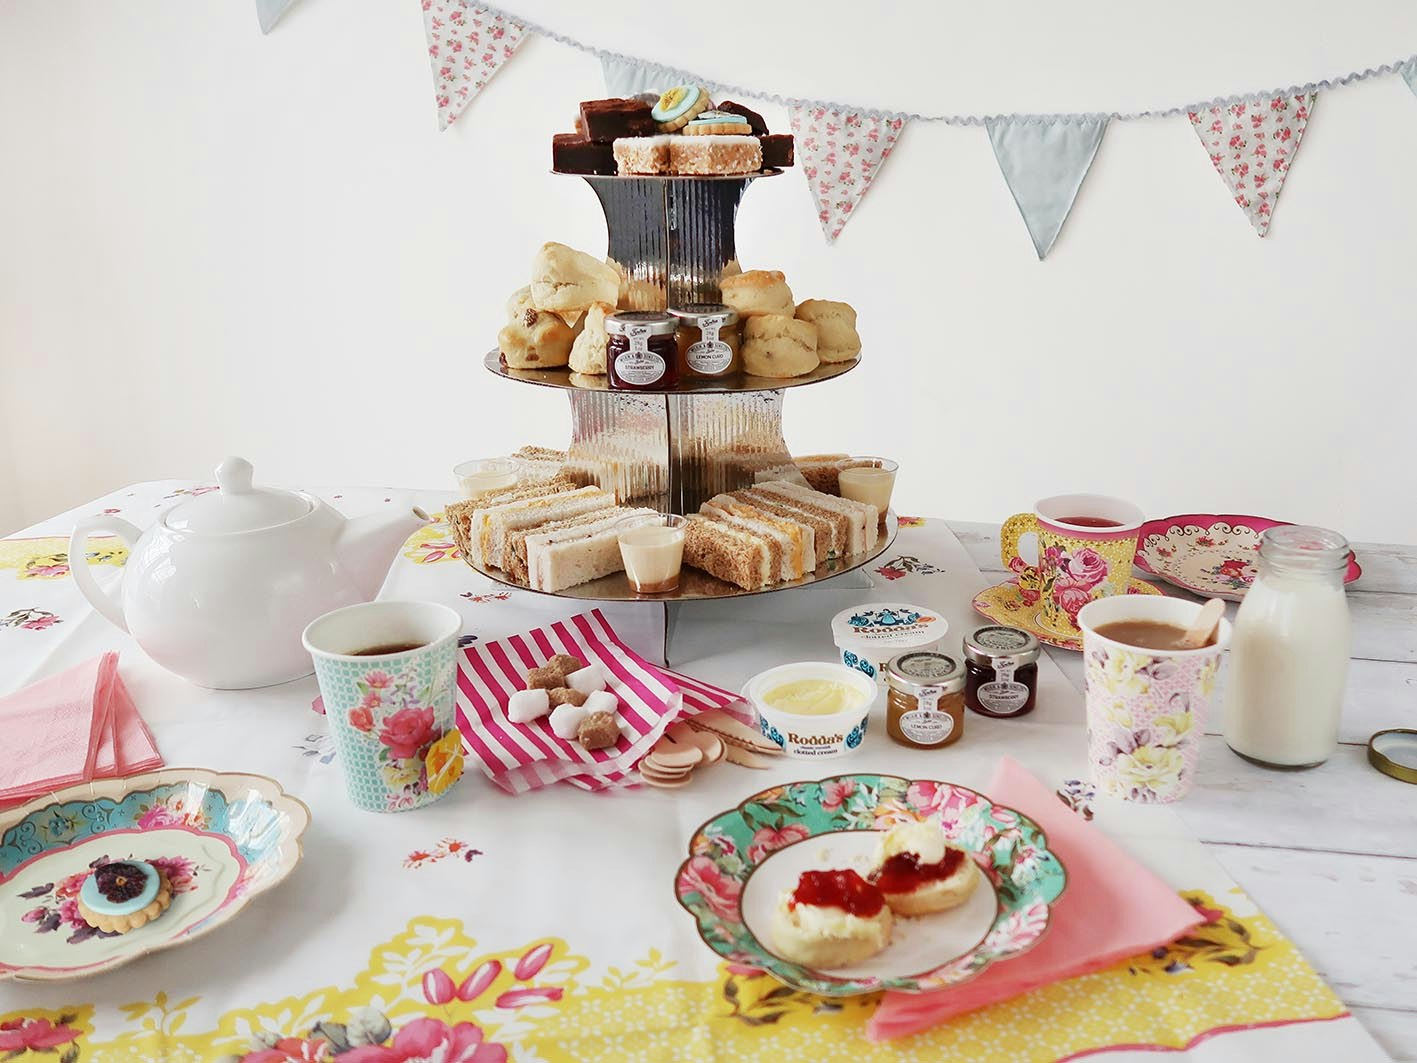 Brew and Bakes afternoon tea at home set. Vintage cardboard plates.